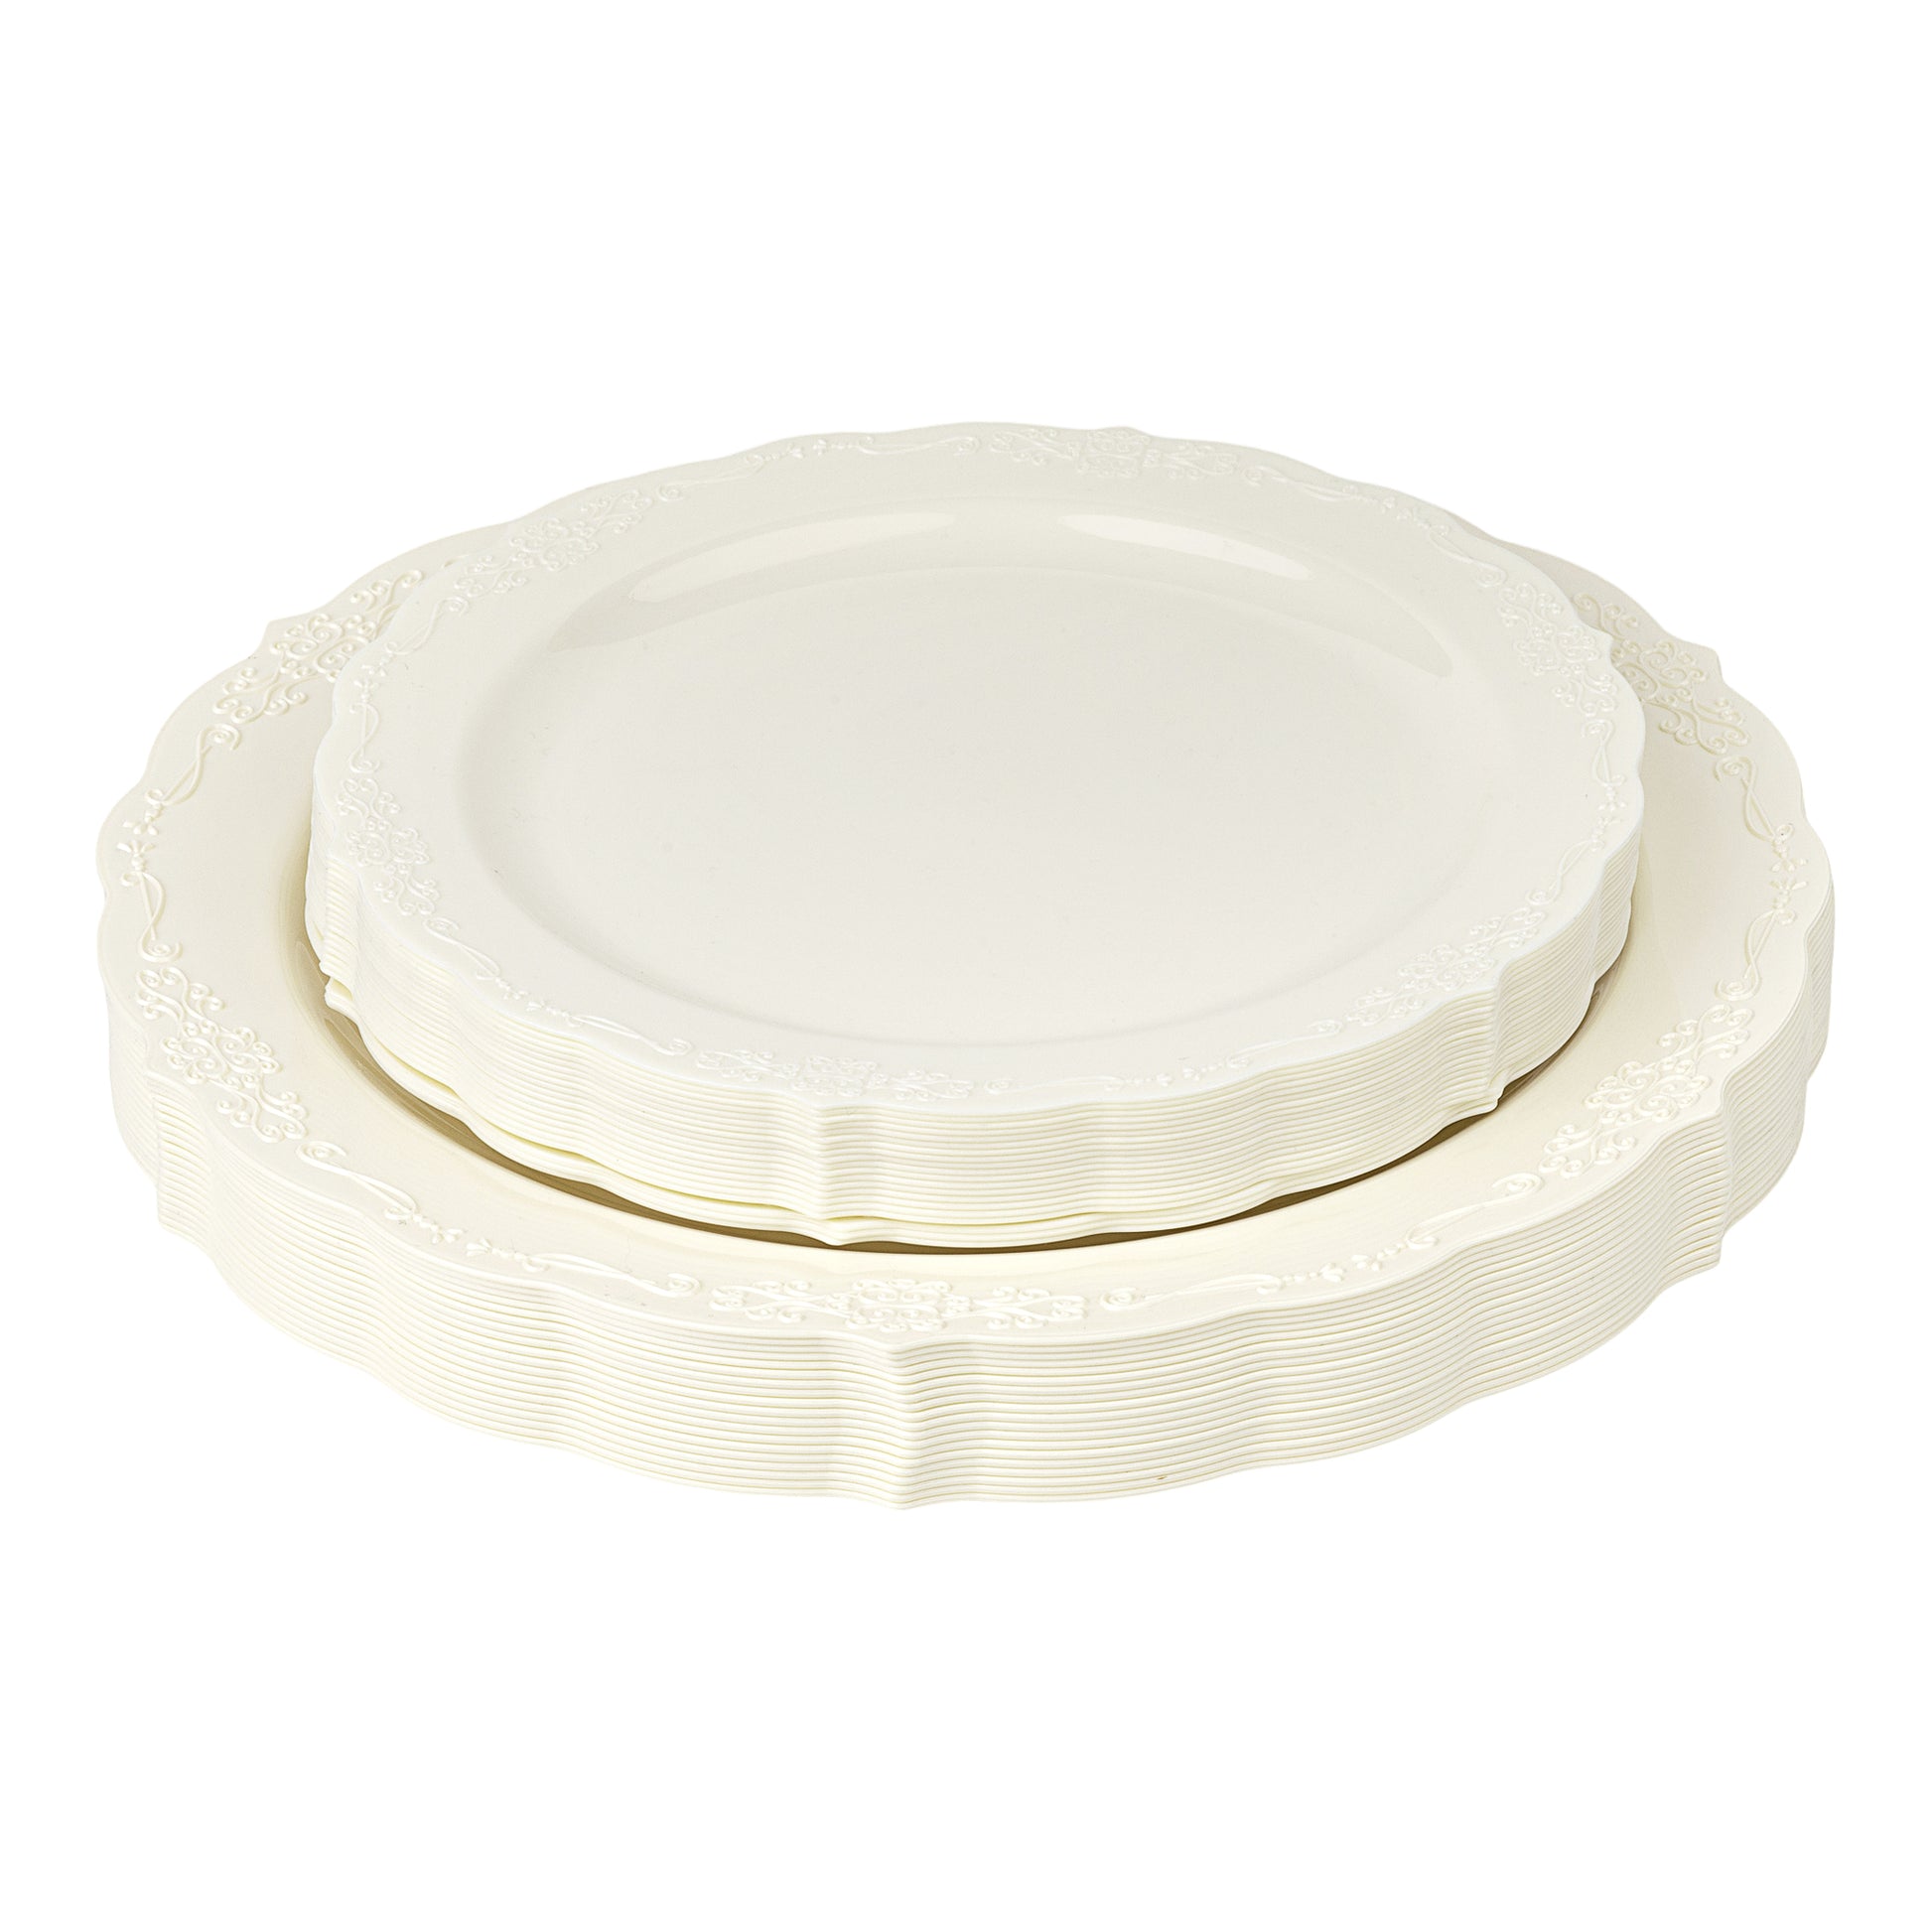 Embossed Disposable Plastic Plates 40 pcs Combo Pack - Ivory